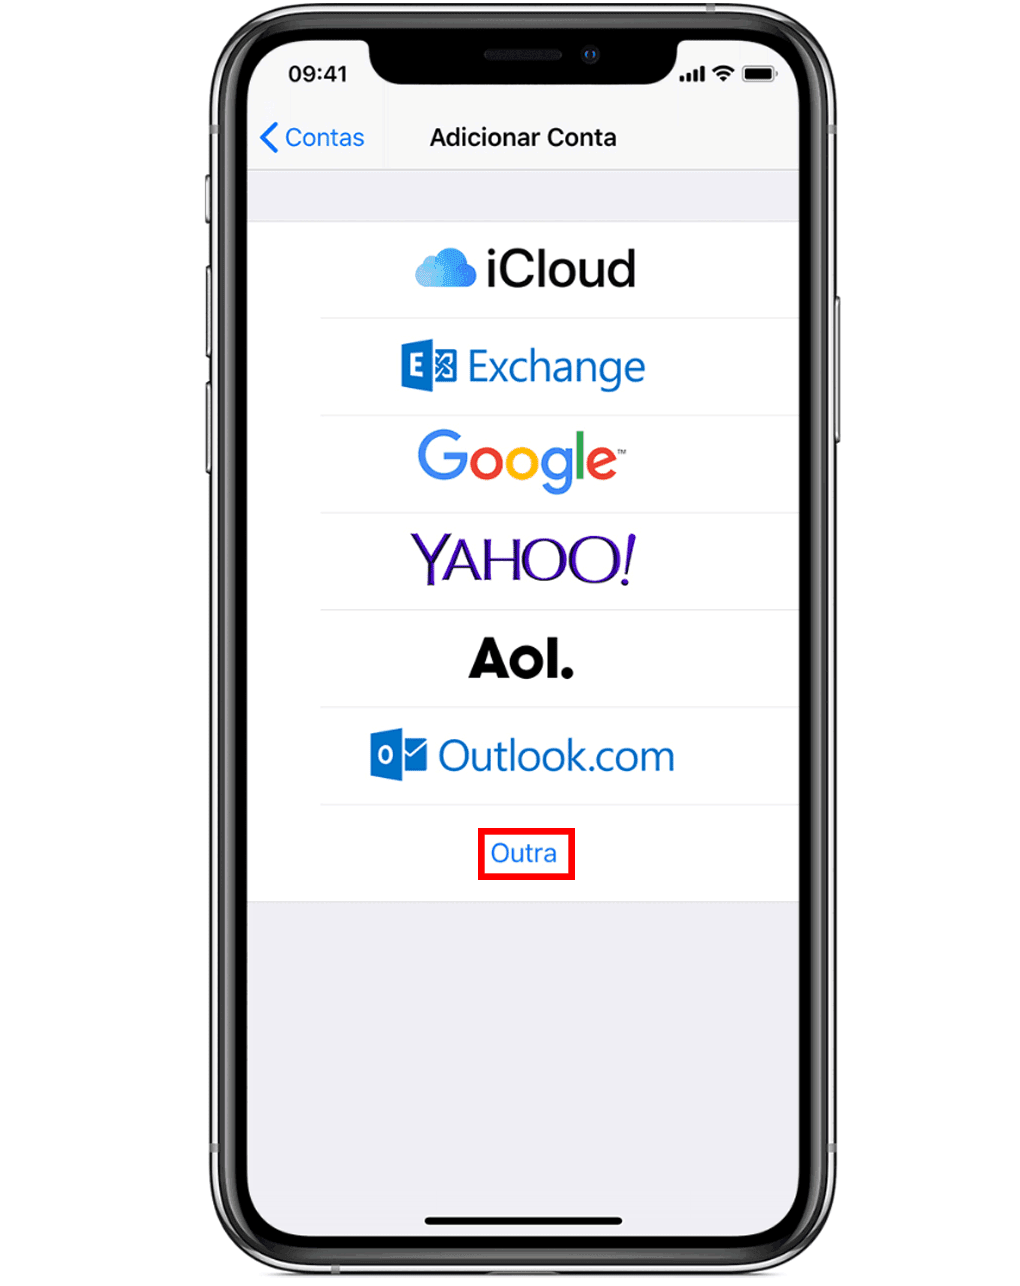 email provider selection screen on iphone